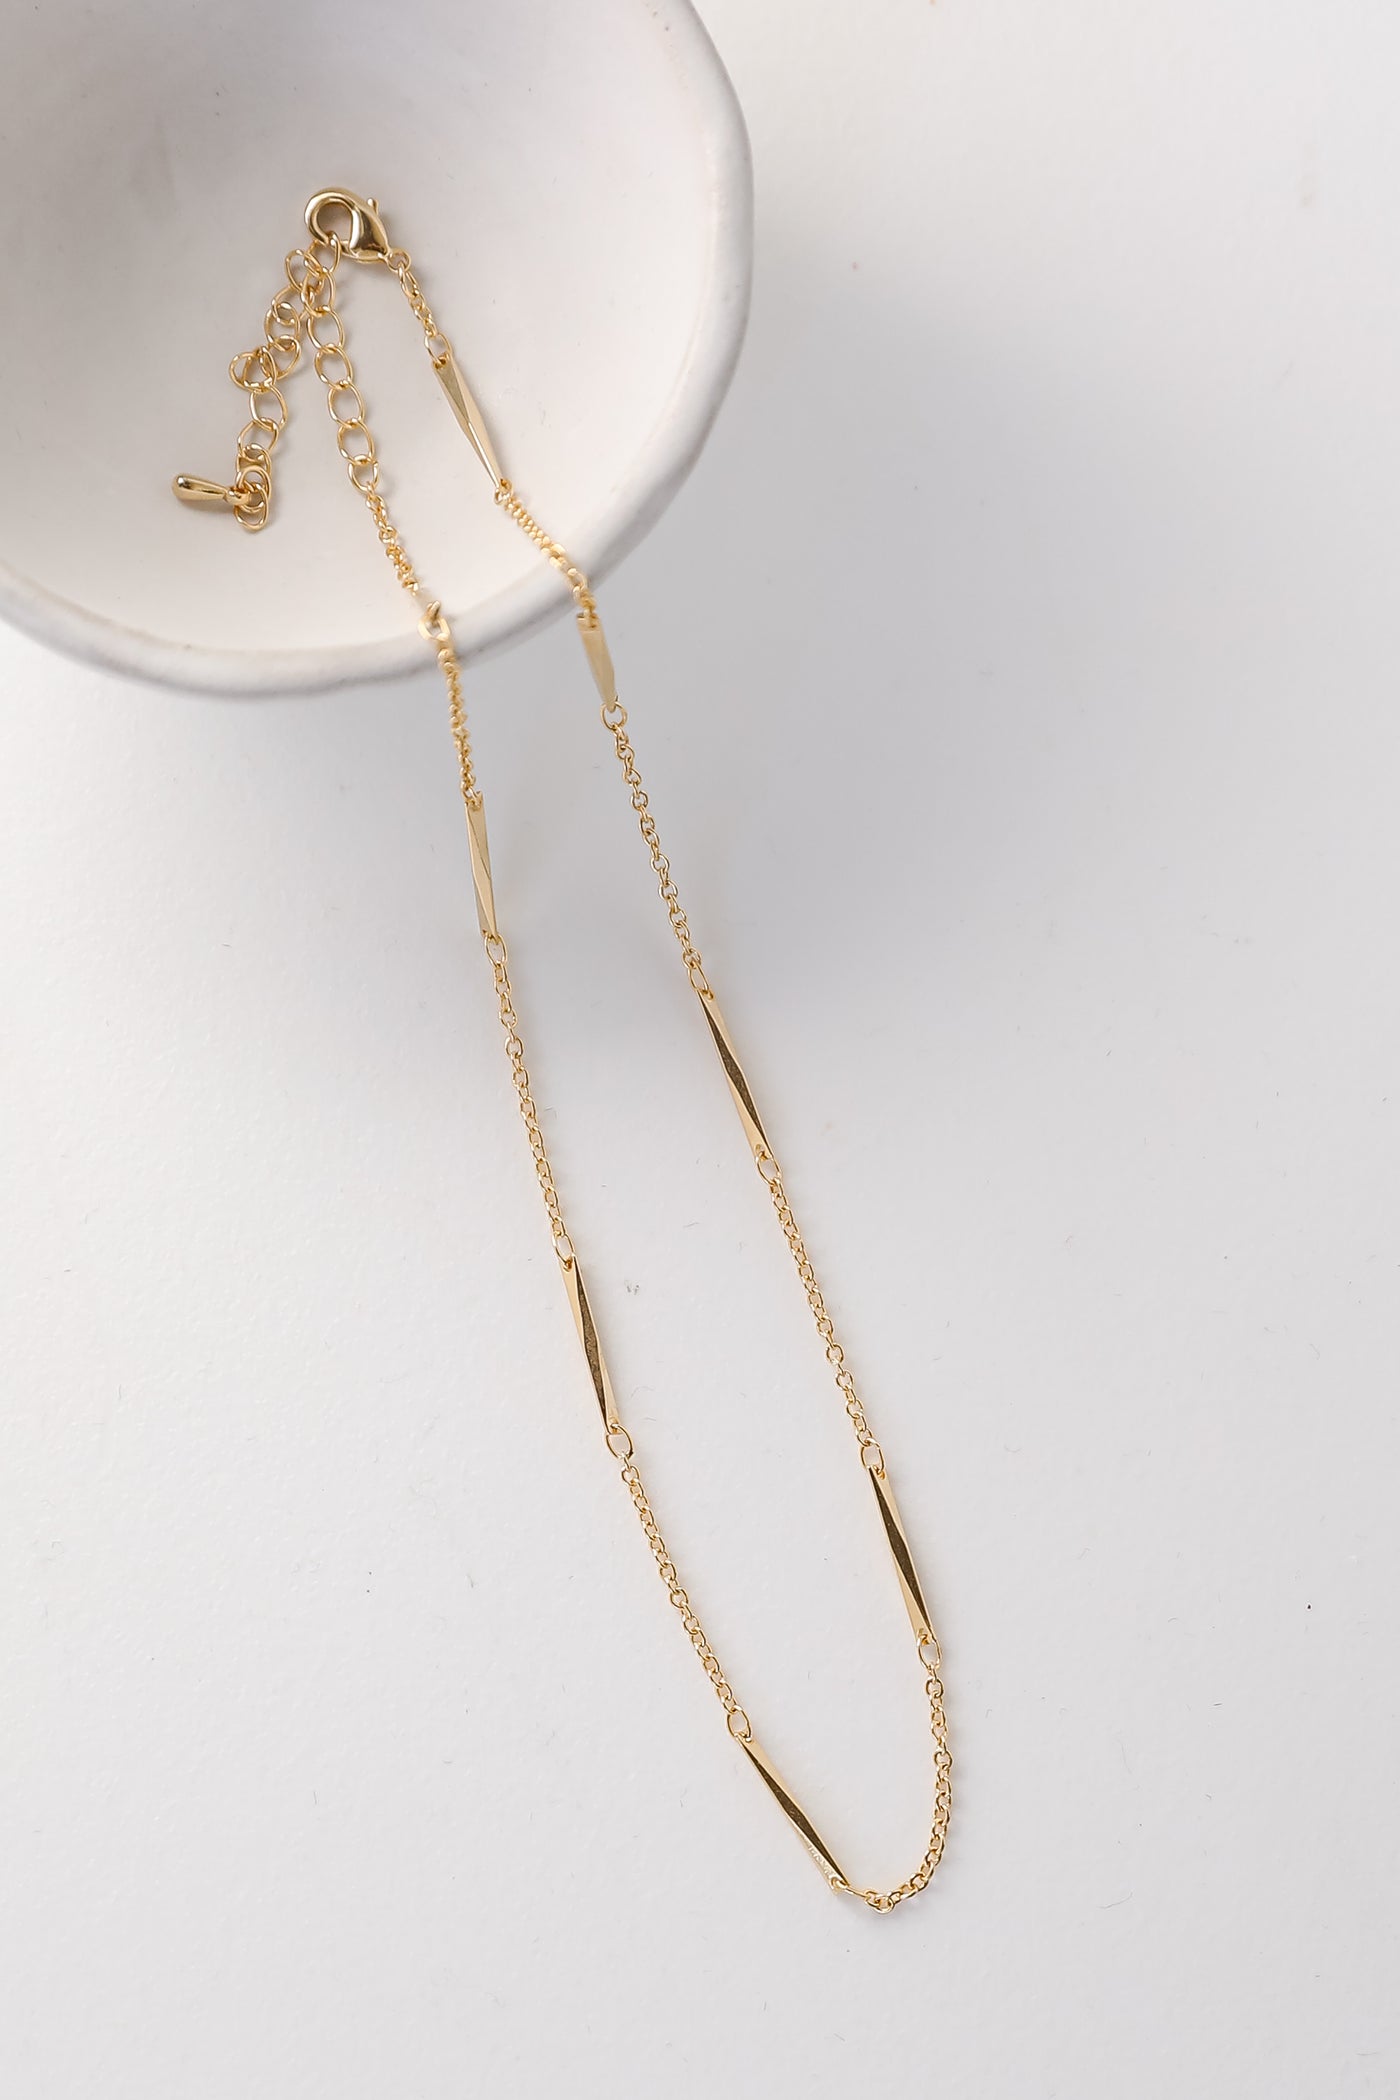 Gold Chain Necklace close up